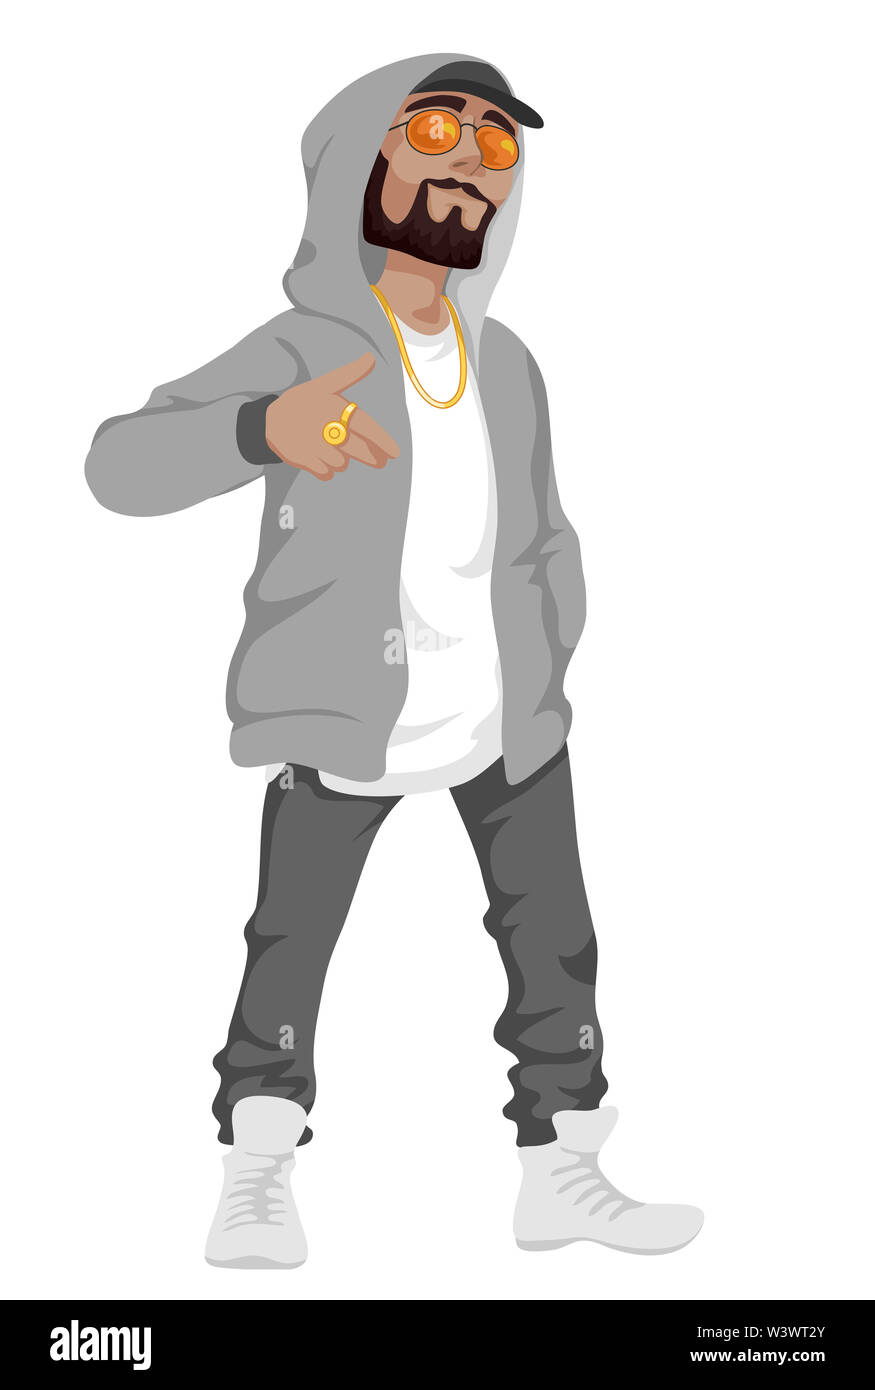 Illustration of a Man Wearing Hip Hop Fashion from Hoodie, Sunglasses, Gold  Necklace and Ring, Cap, Jeans and High Top Rubber Shoes Stock Photo - Alamy